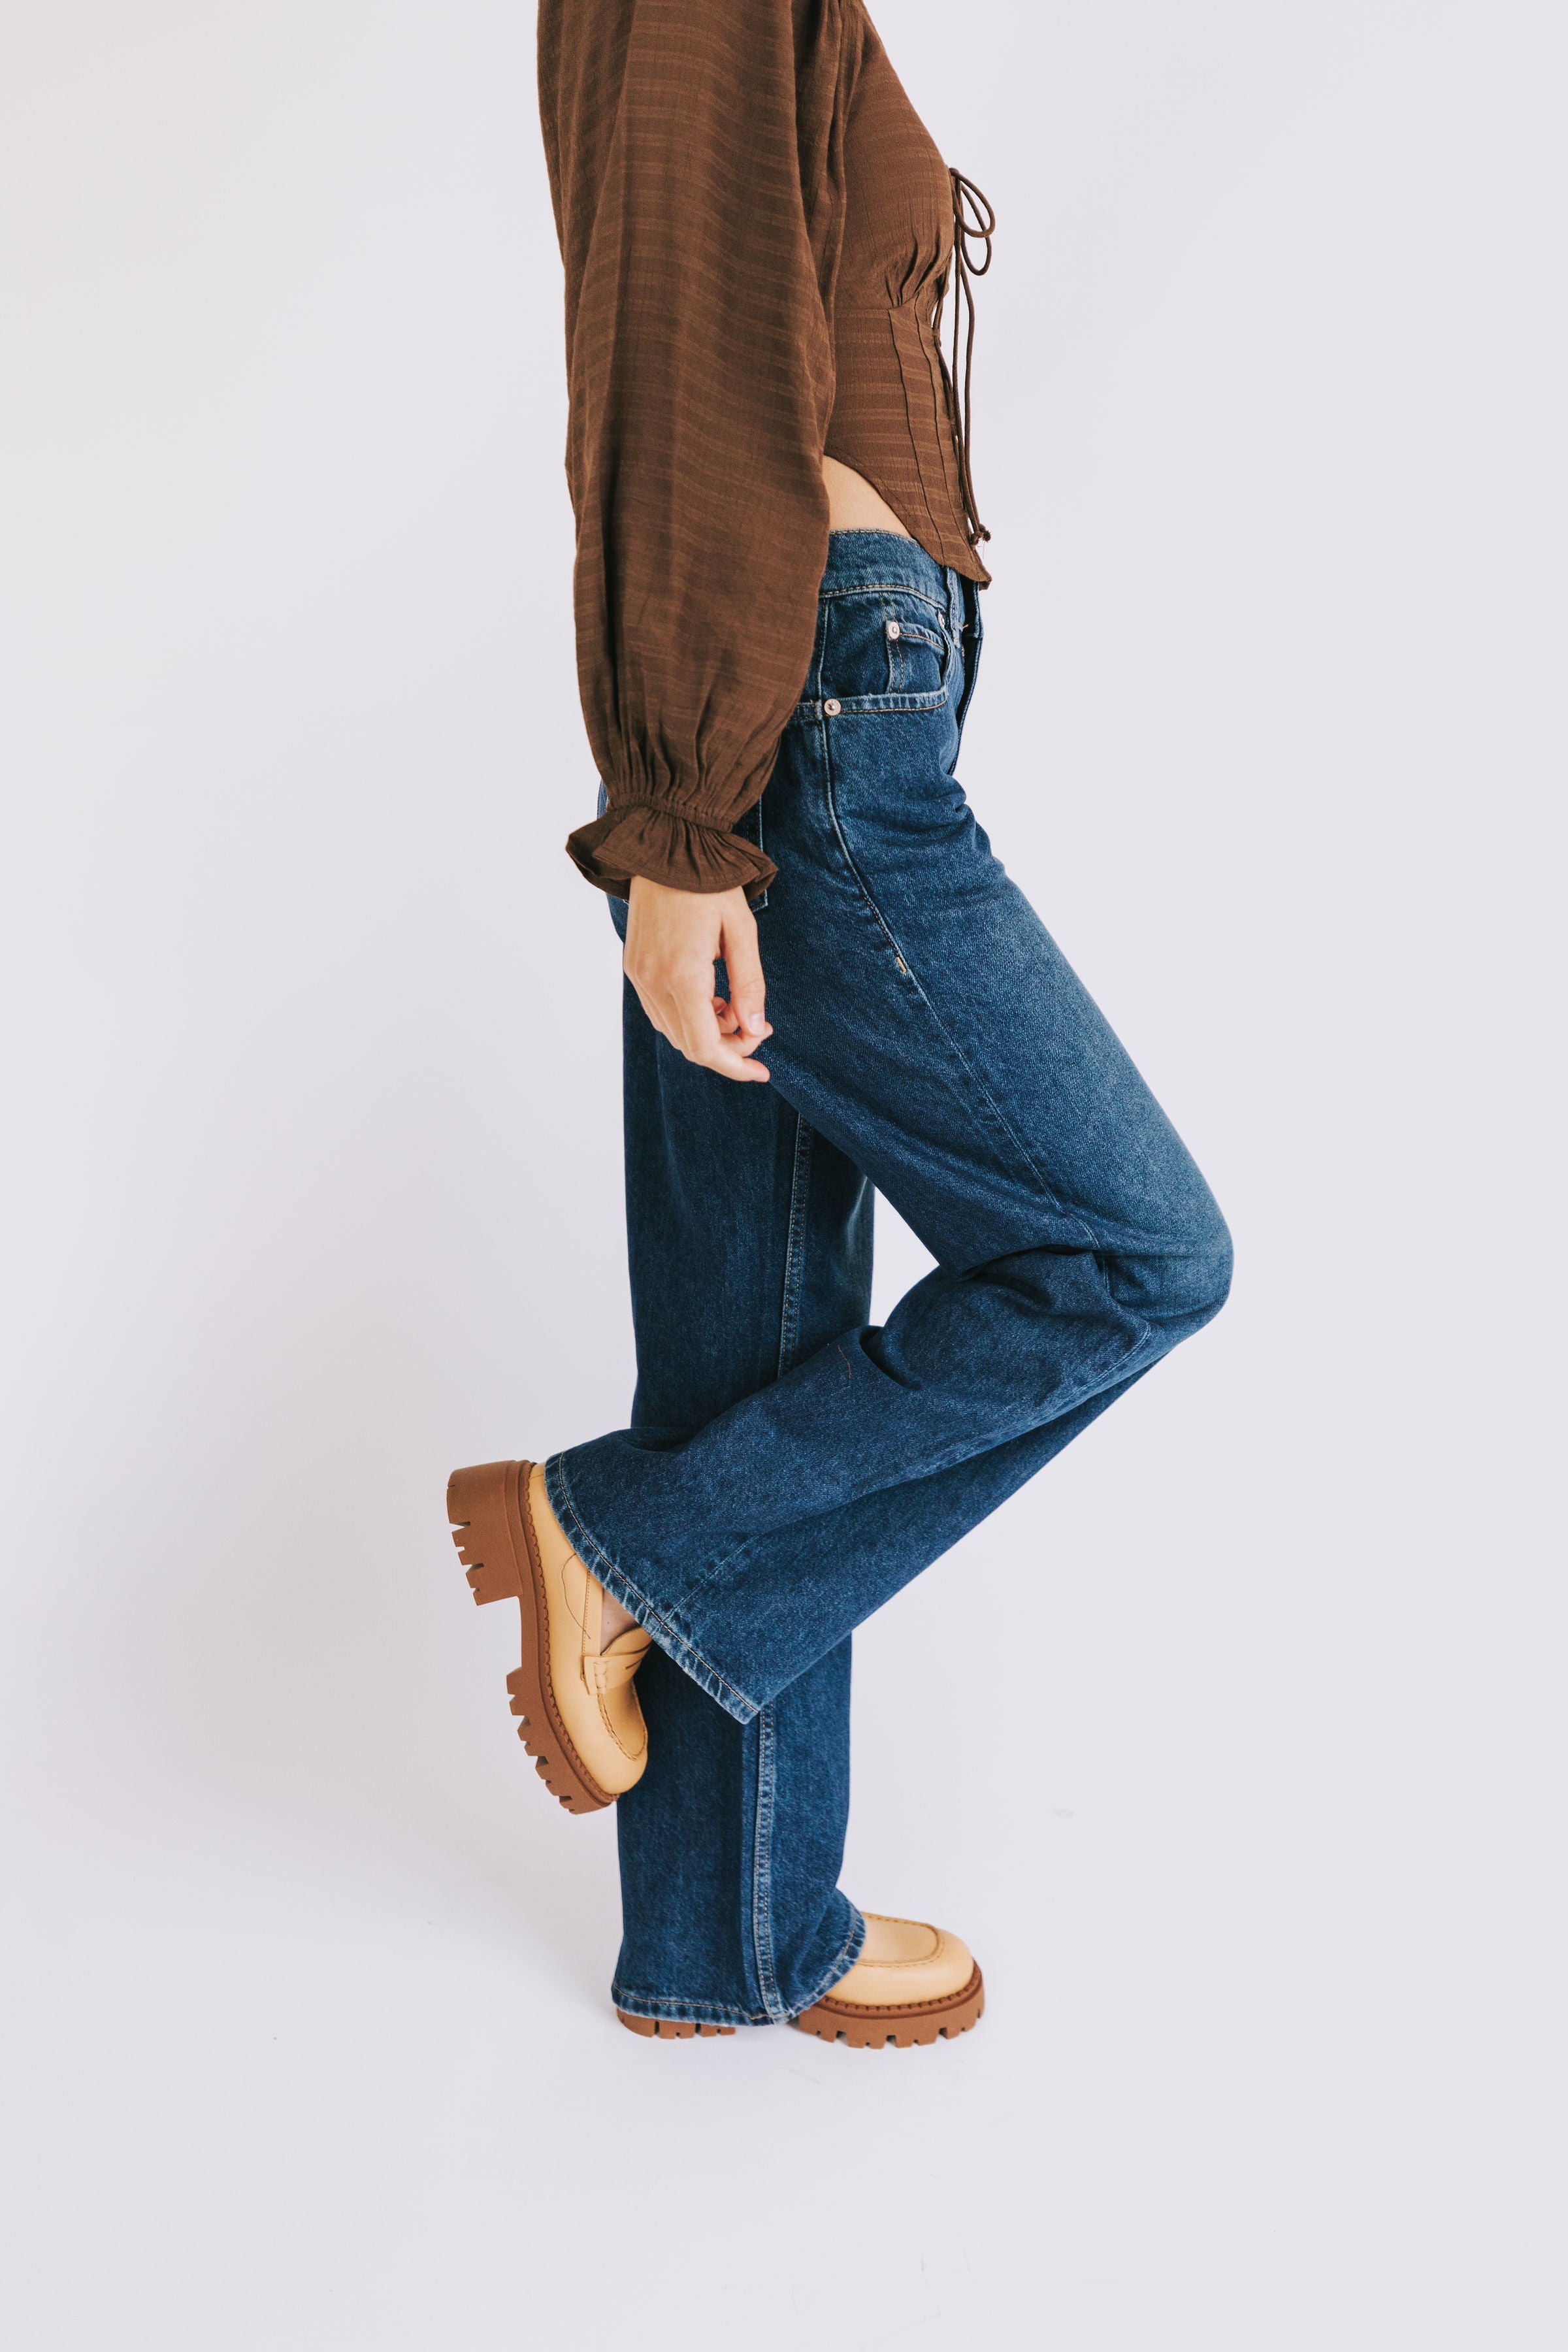 FREE PEOPLE - Tinsley Baggy High-Rise Jeans - 2 Colors